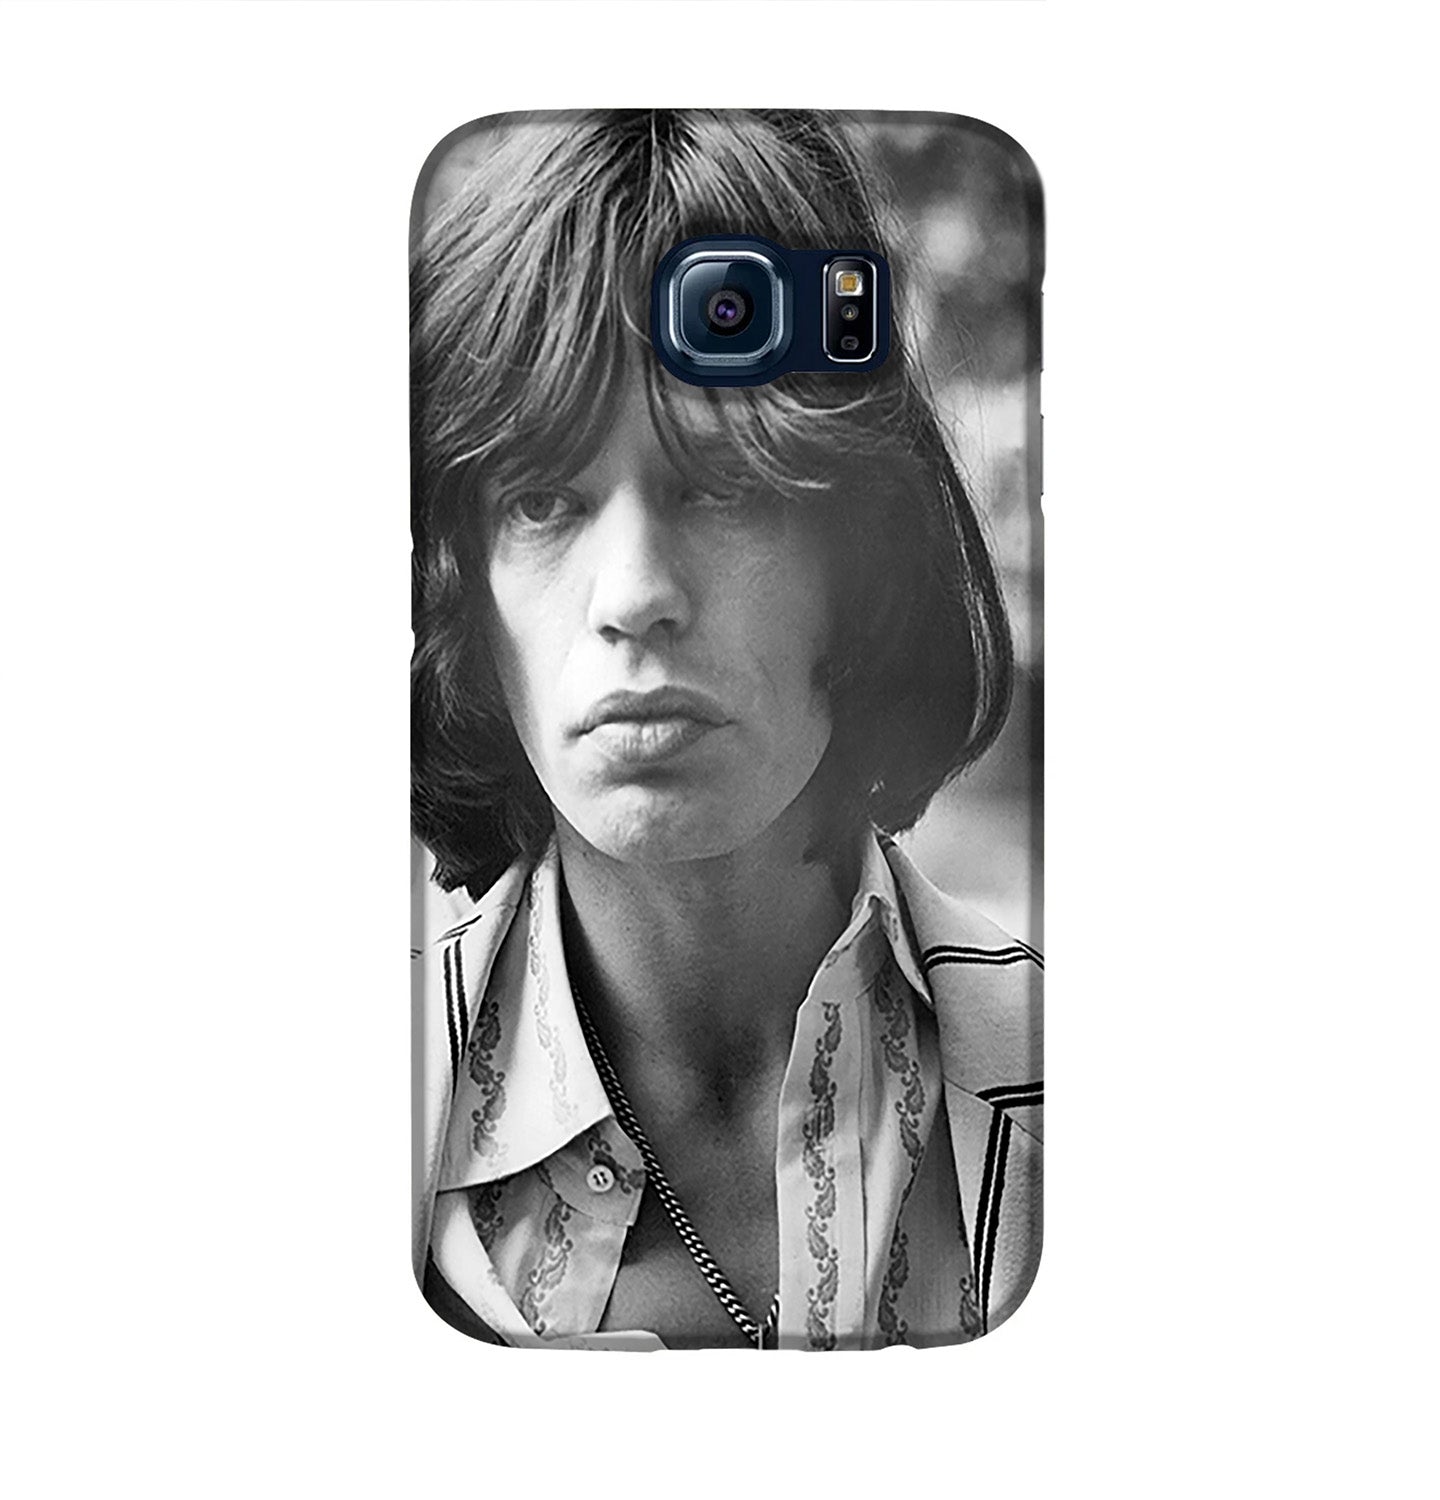 Mick Jagger in 1969 Phone Case Samsung S6